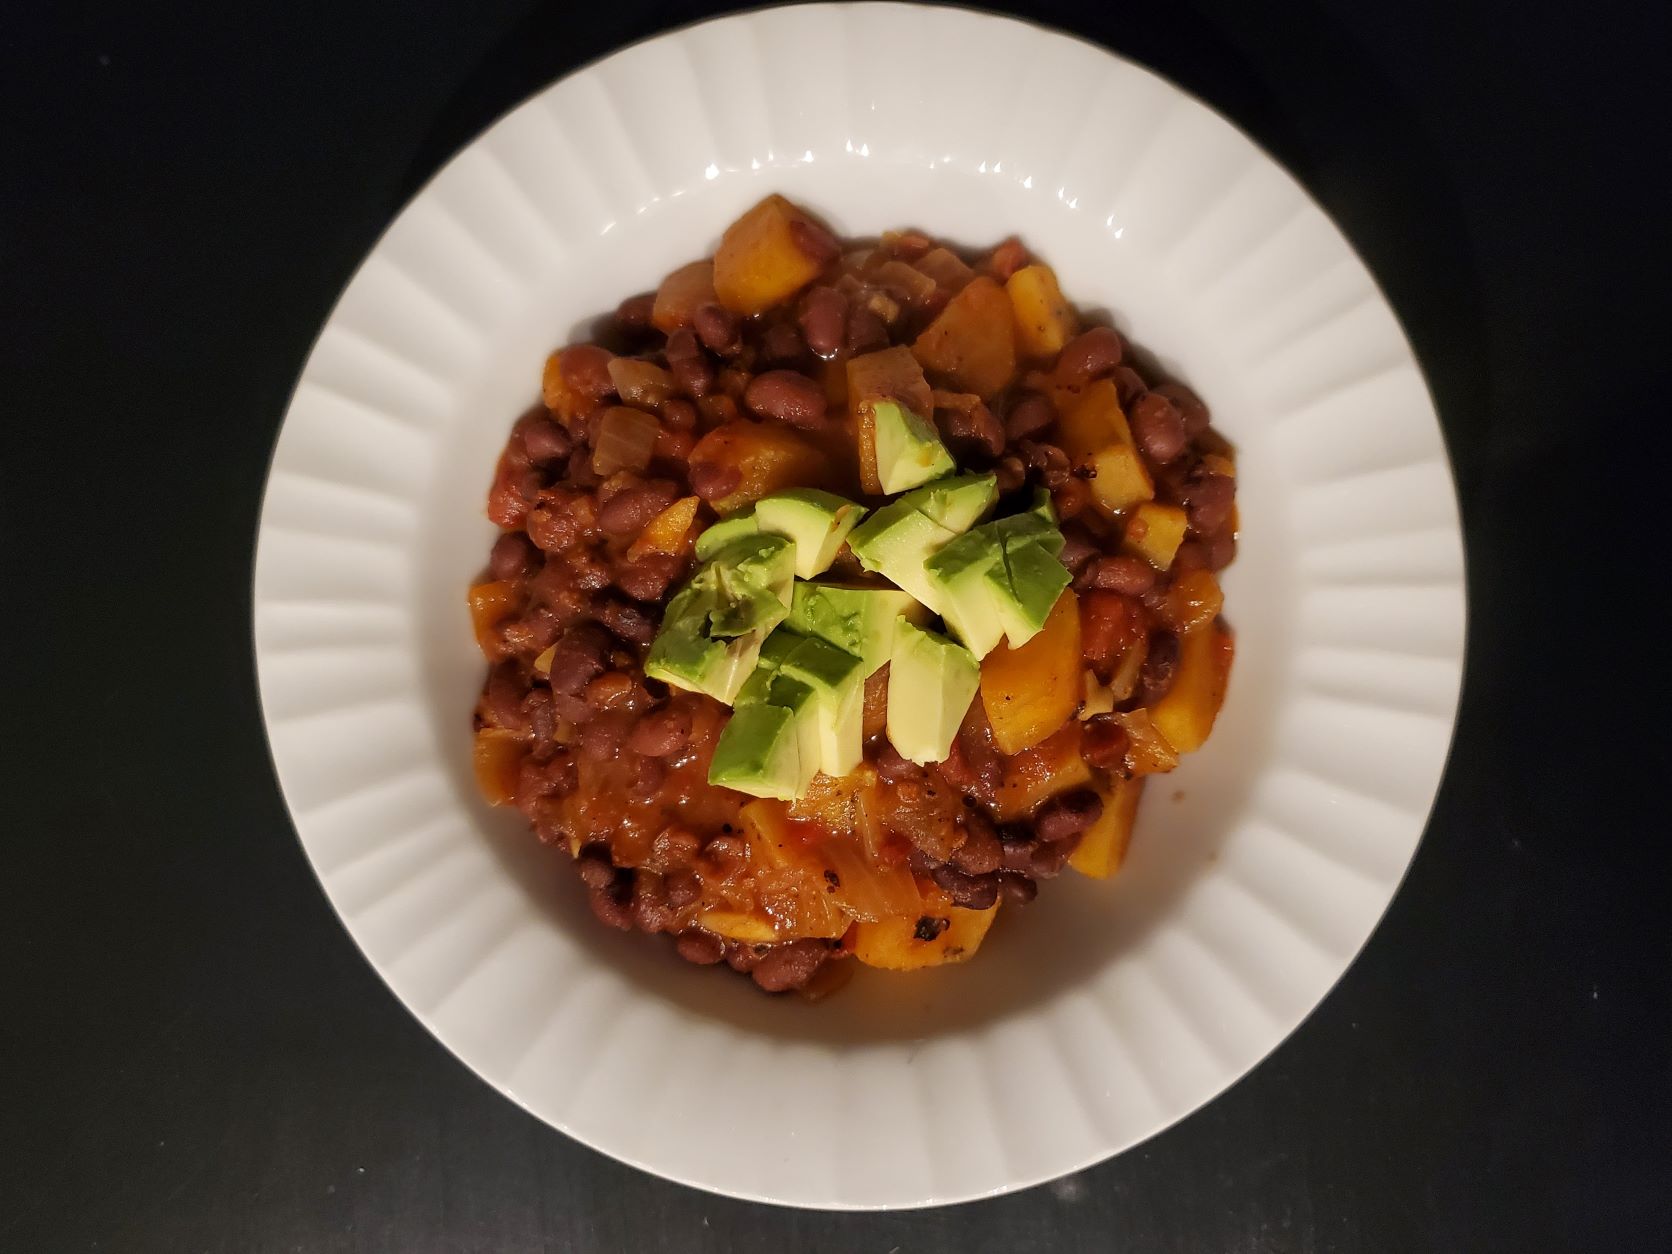 Black Bean and Chipotle Chili with Plantains